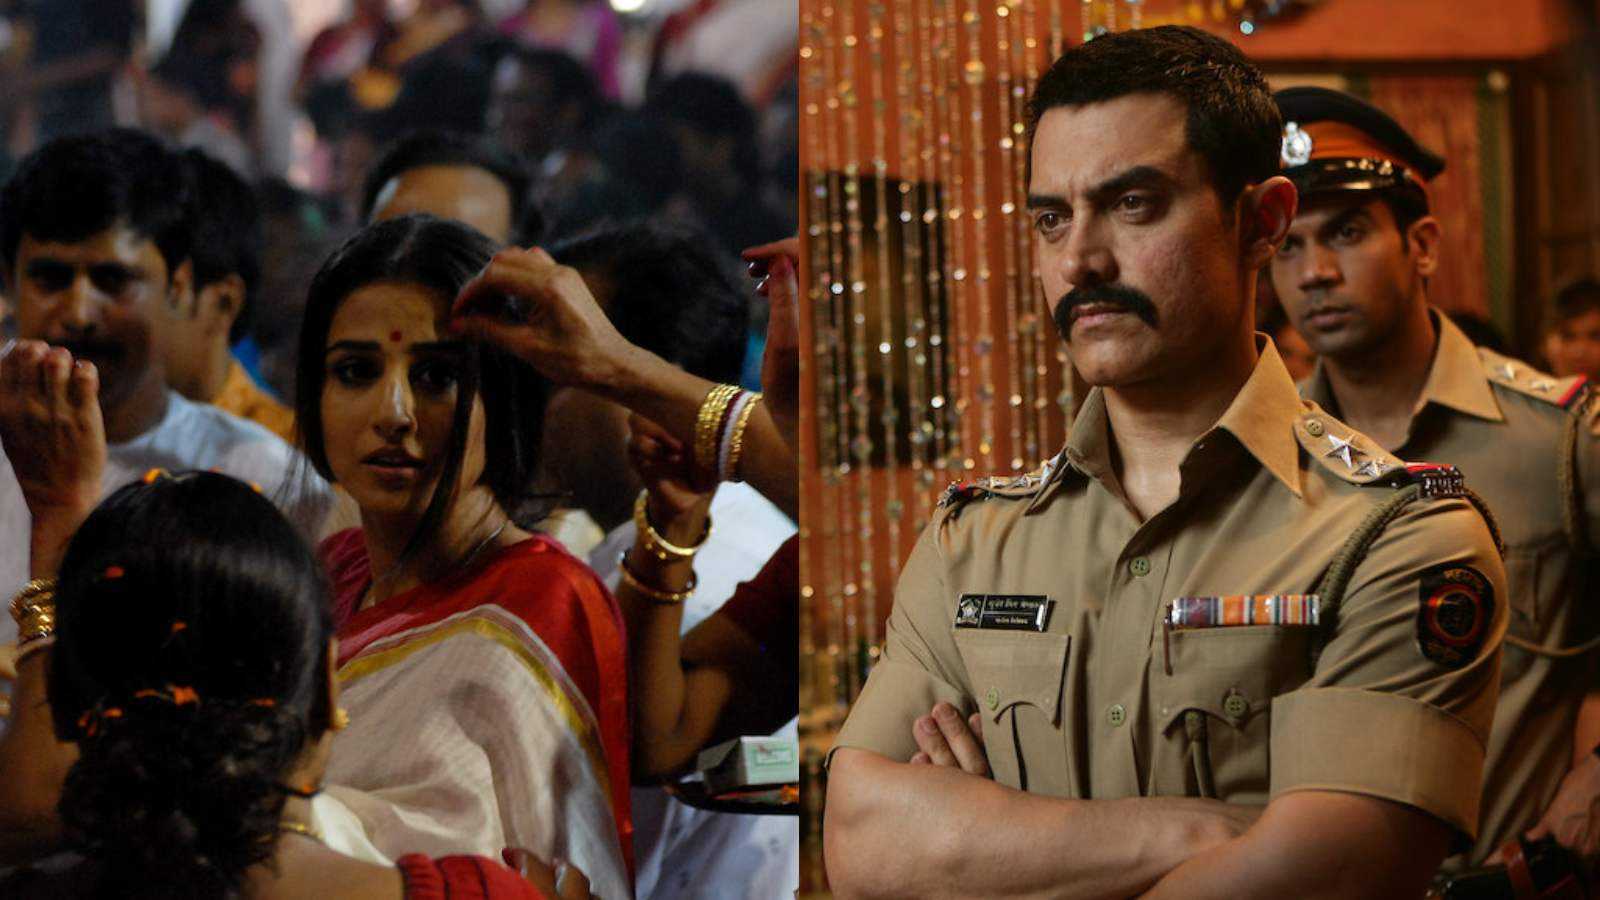 When the success of Vidya Balan's Kahaani made Aamir Khan delay Talaash and change the climax of his film